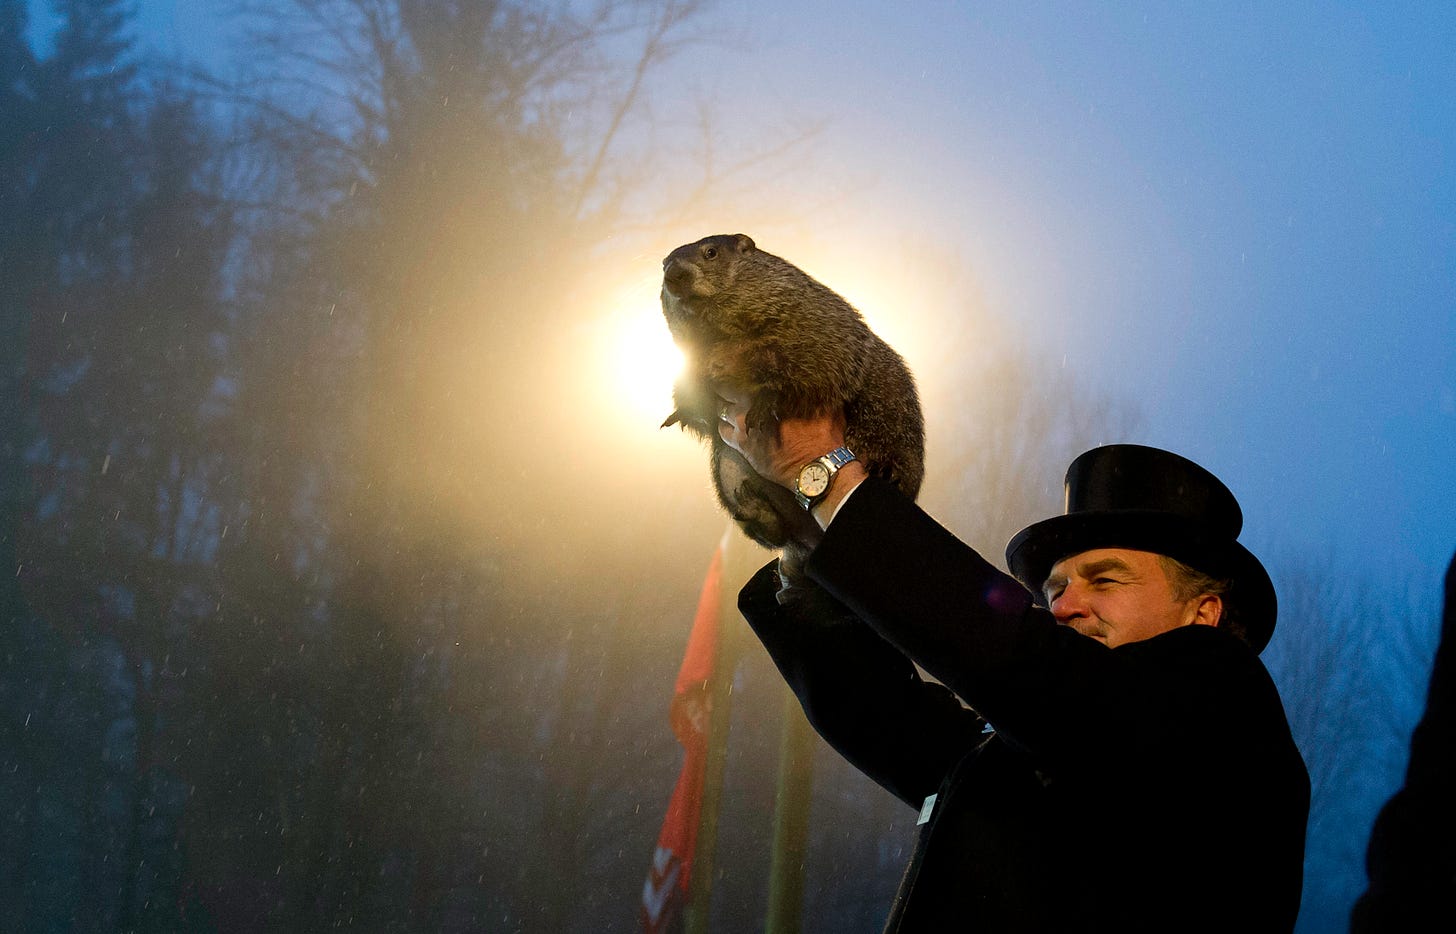 A groundhog lifted into the morning sky against a bright yellow back light.